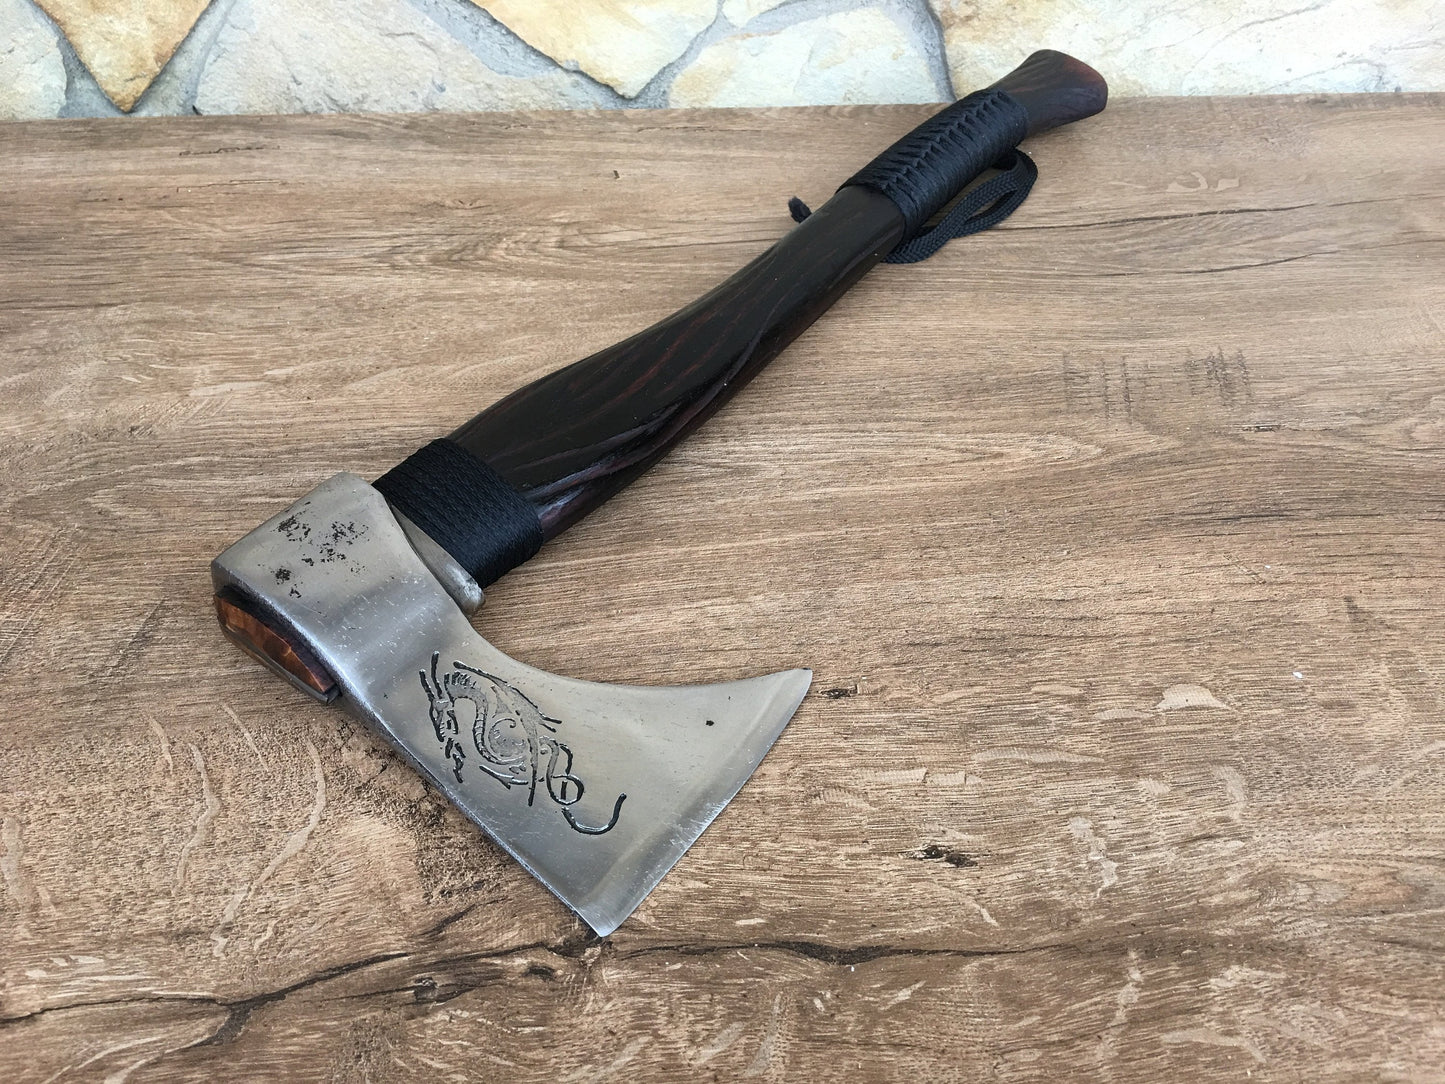 Viking axe, tomahawk, axe, hatchet, mens gift, anniversary gift, his birthday gift, viking gifts, mens gifts, manly gifts, womens gift, axes